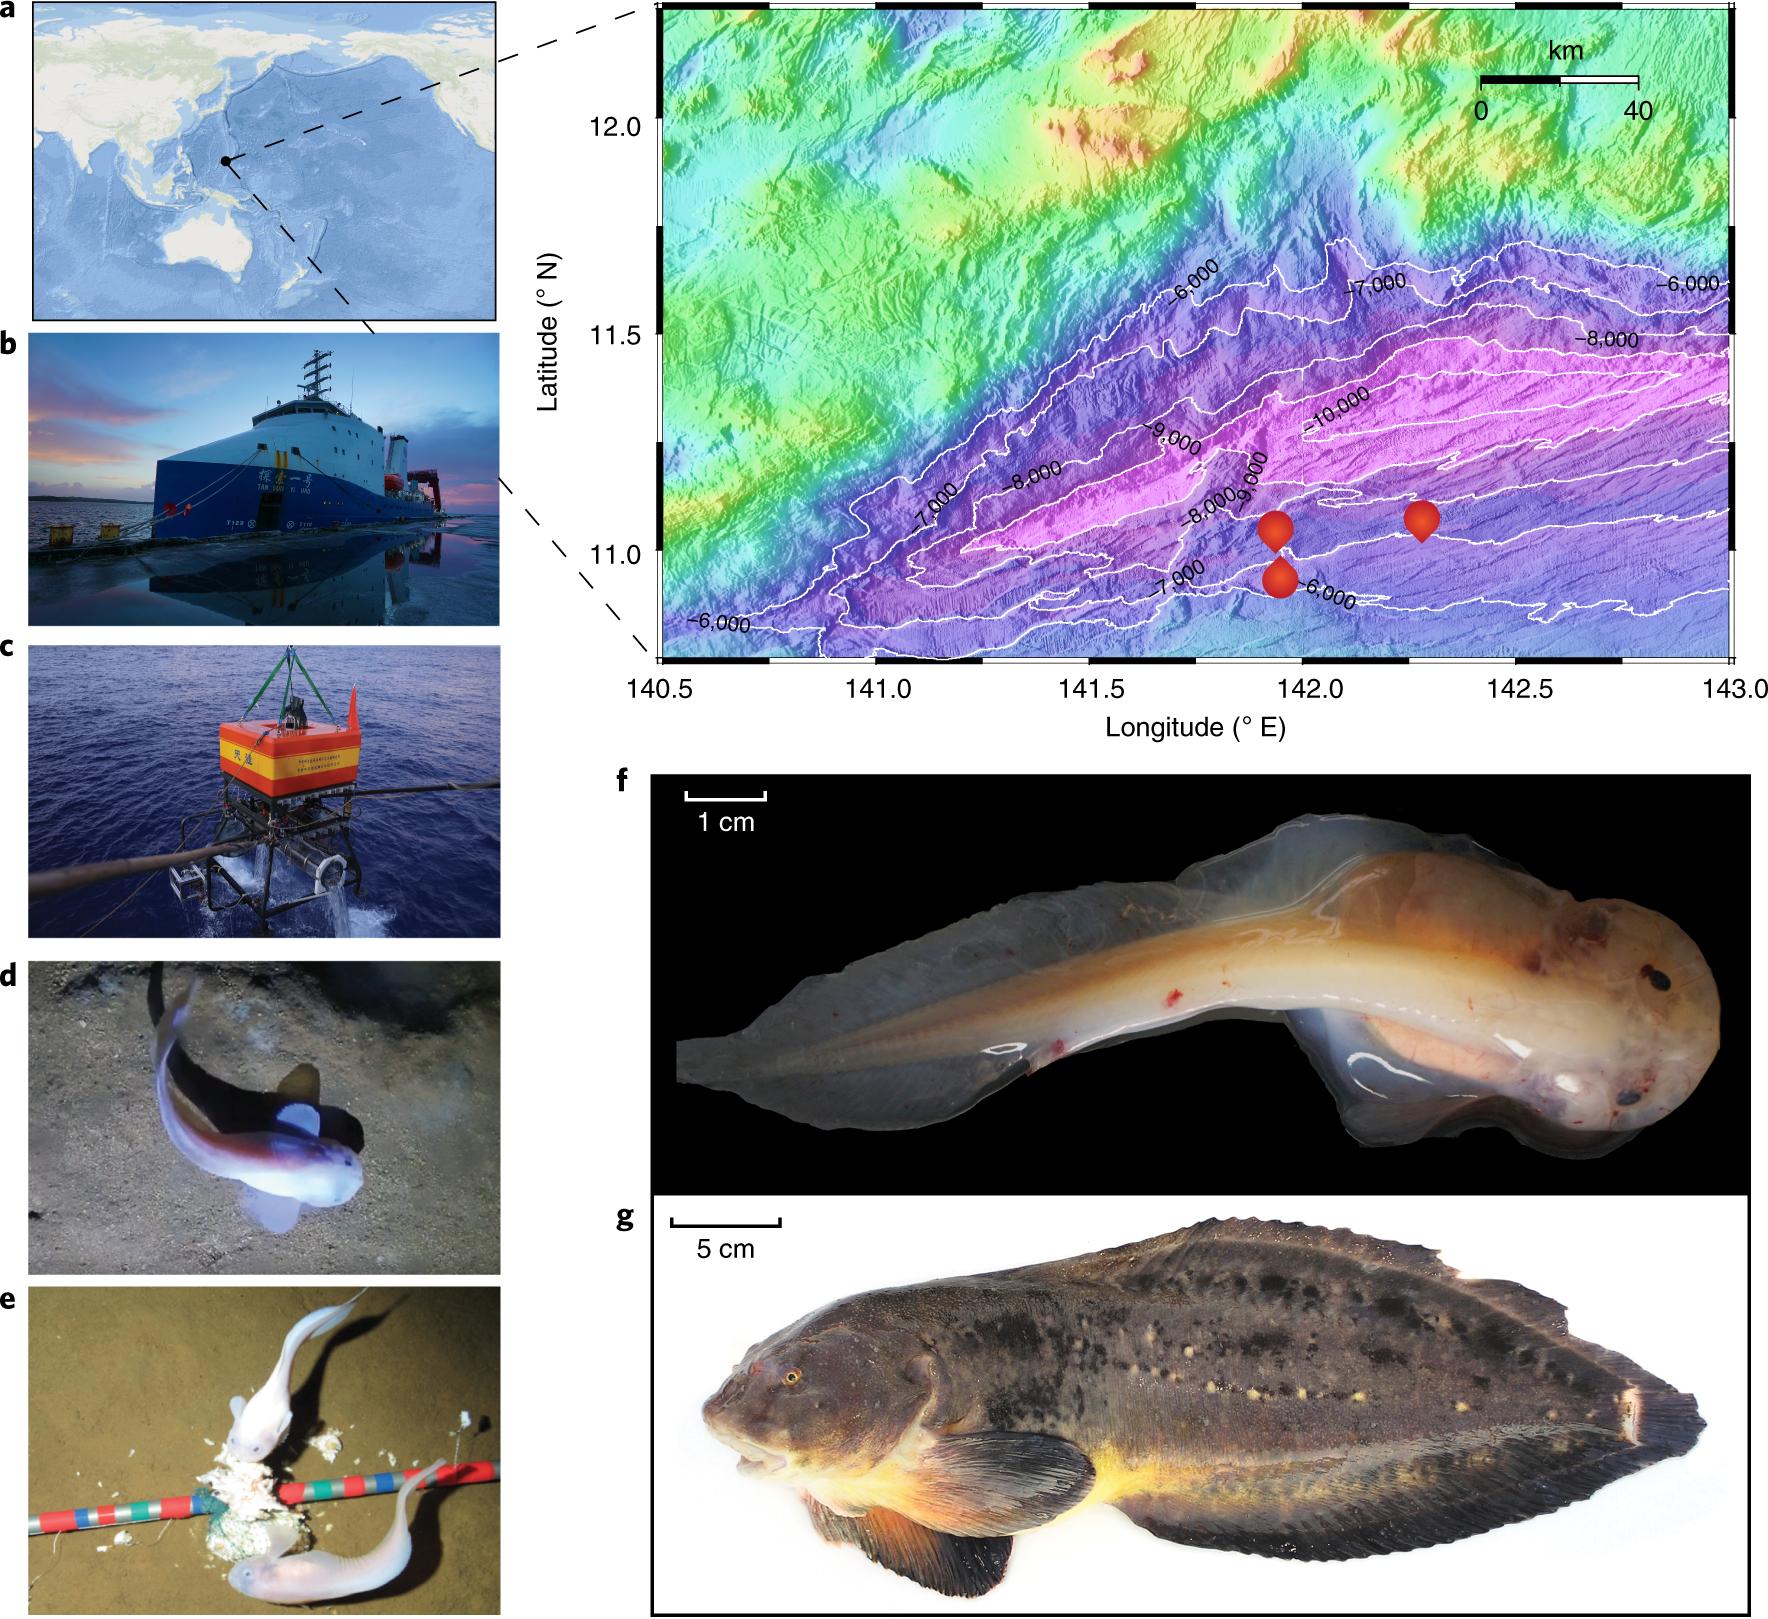 Morphology and genome of a snailfish from the Mariana Trench provide  insights into deep-sea adaptation | Nature Ecology & Evolution